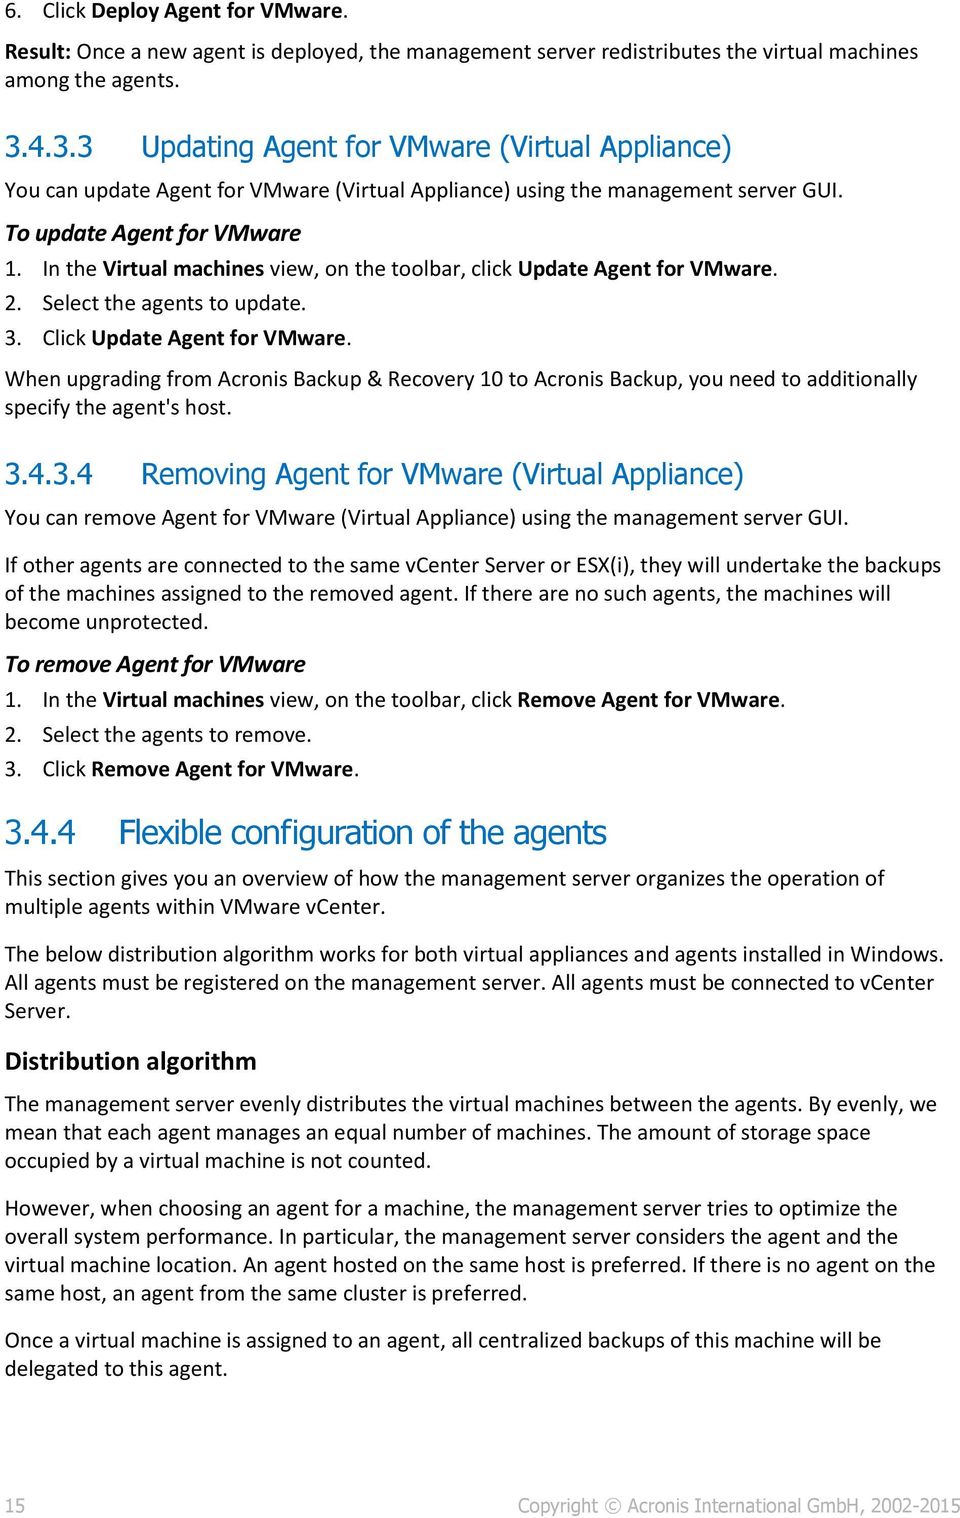 In the Virtual machines view, on the toolbar, click Update Agent for VMware. 2. Select the agents to update. 3. Click Update Agent for VMware.